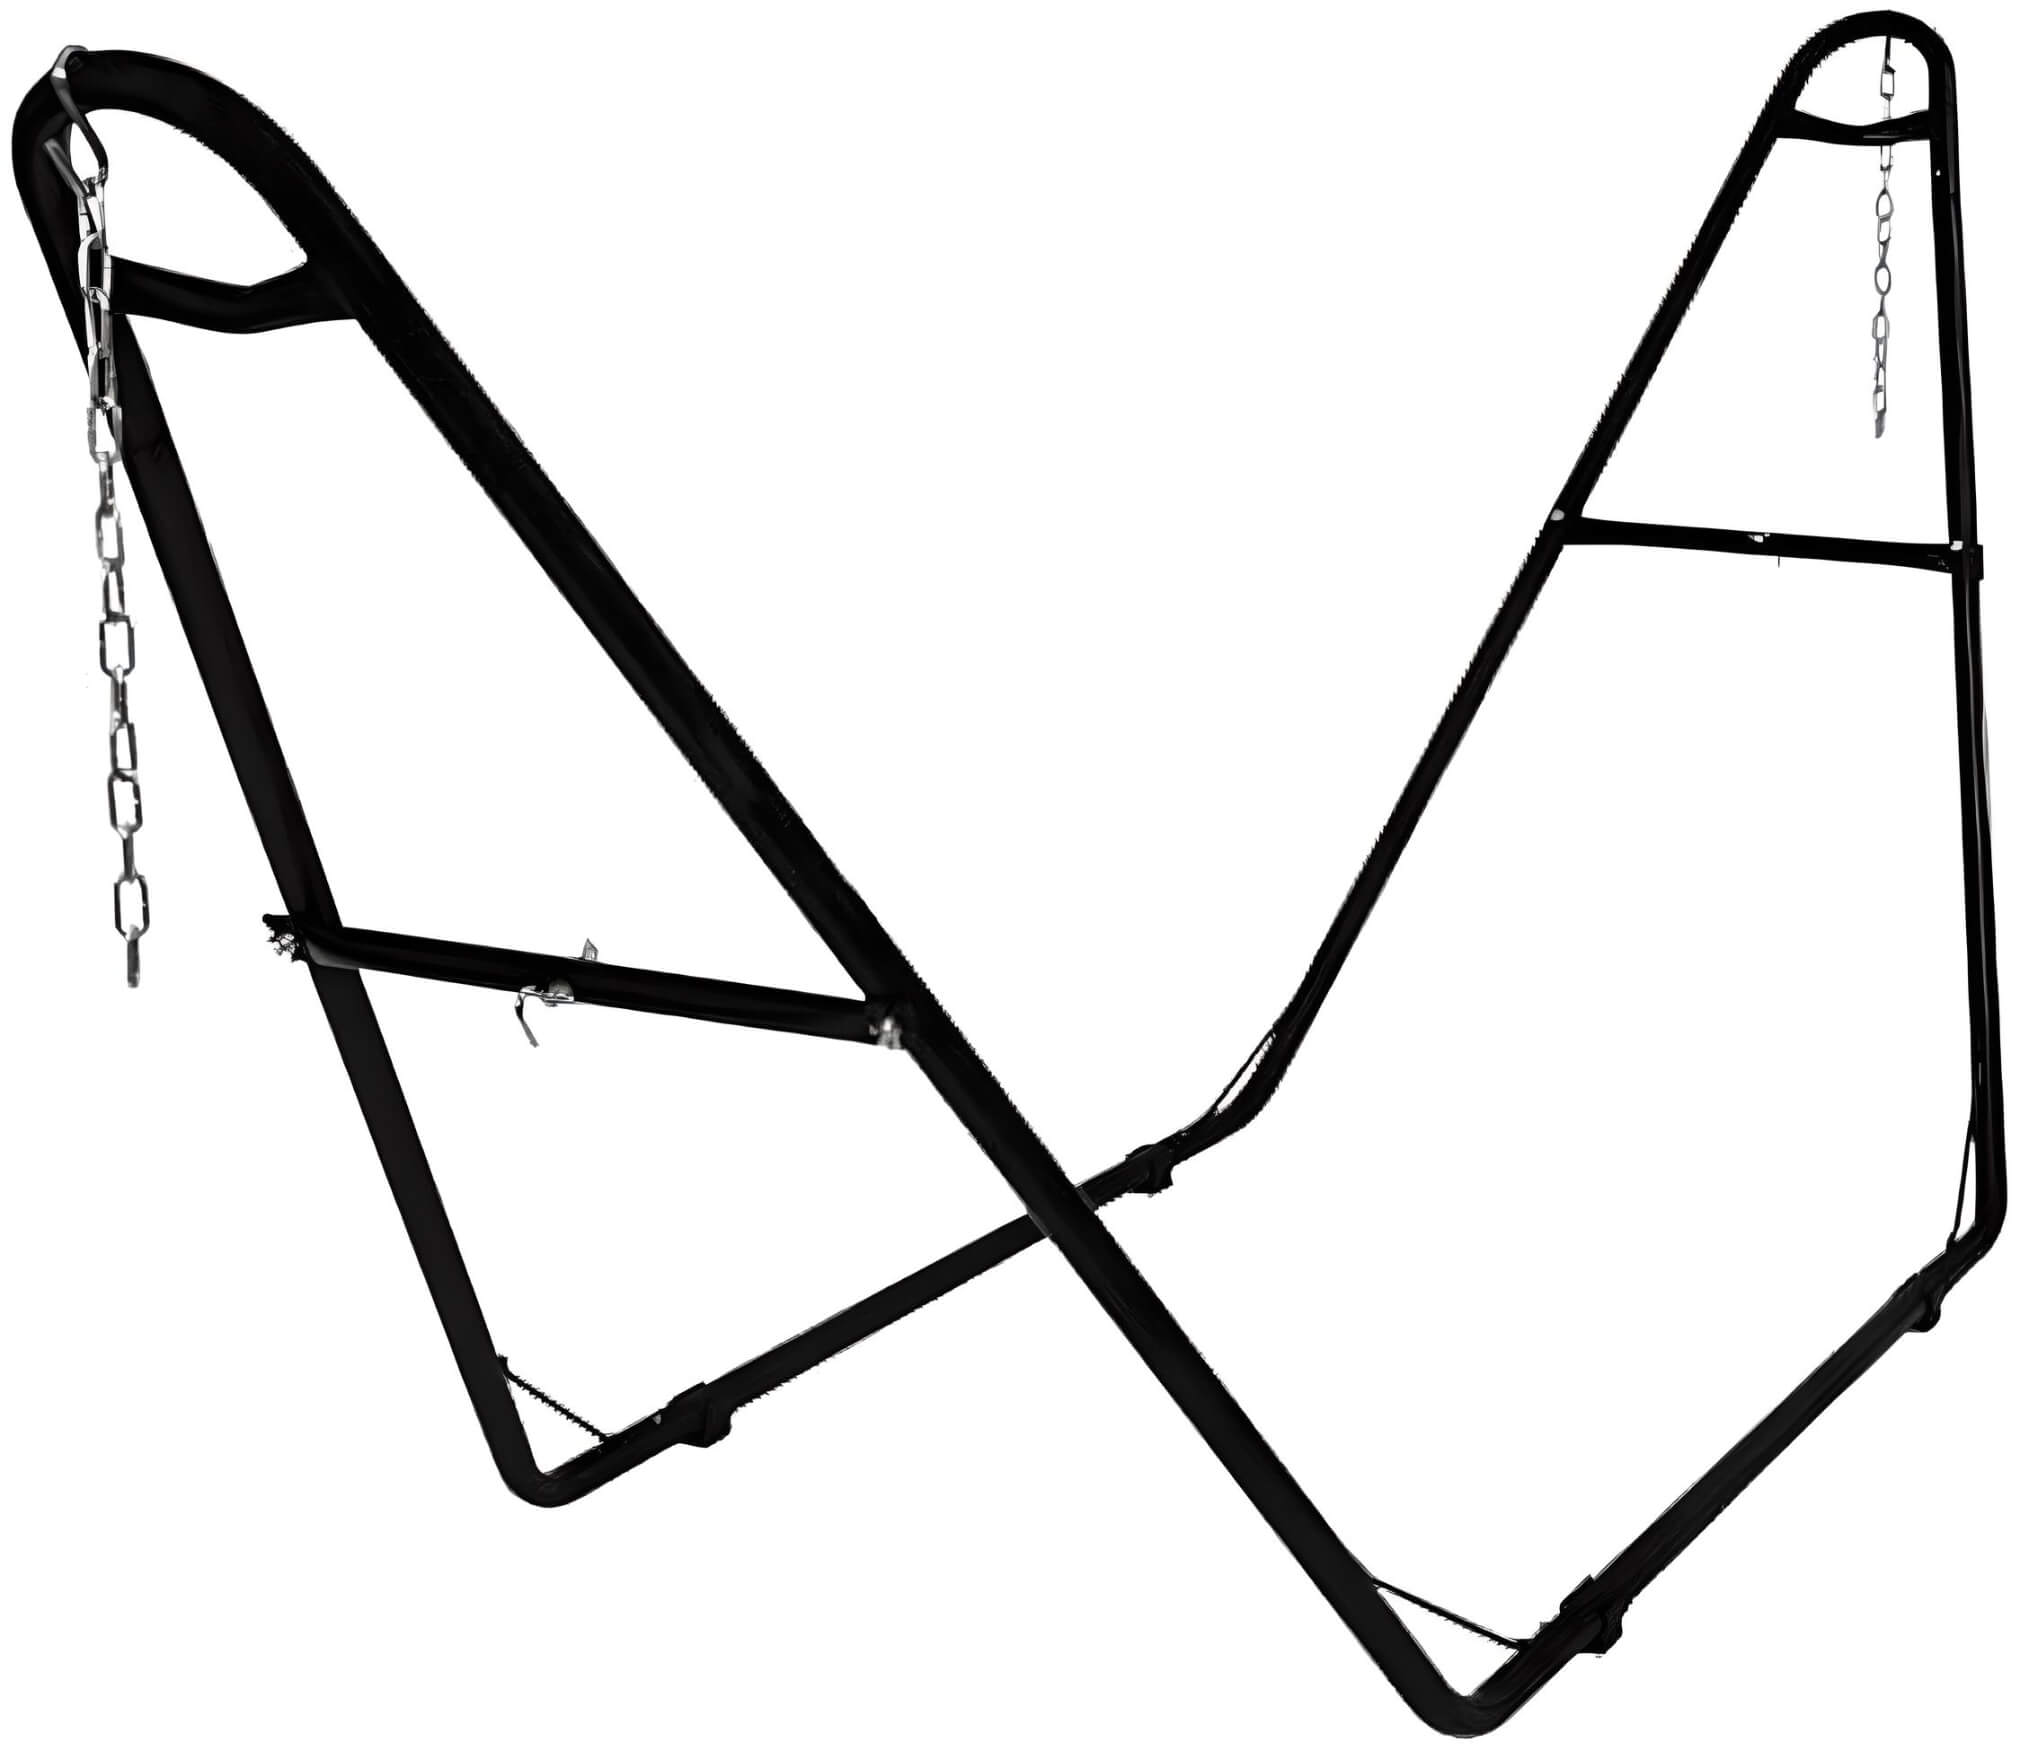    demo-of-heavy-duty-2-person-hammock-with-stand